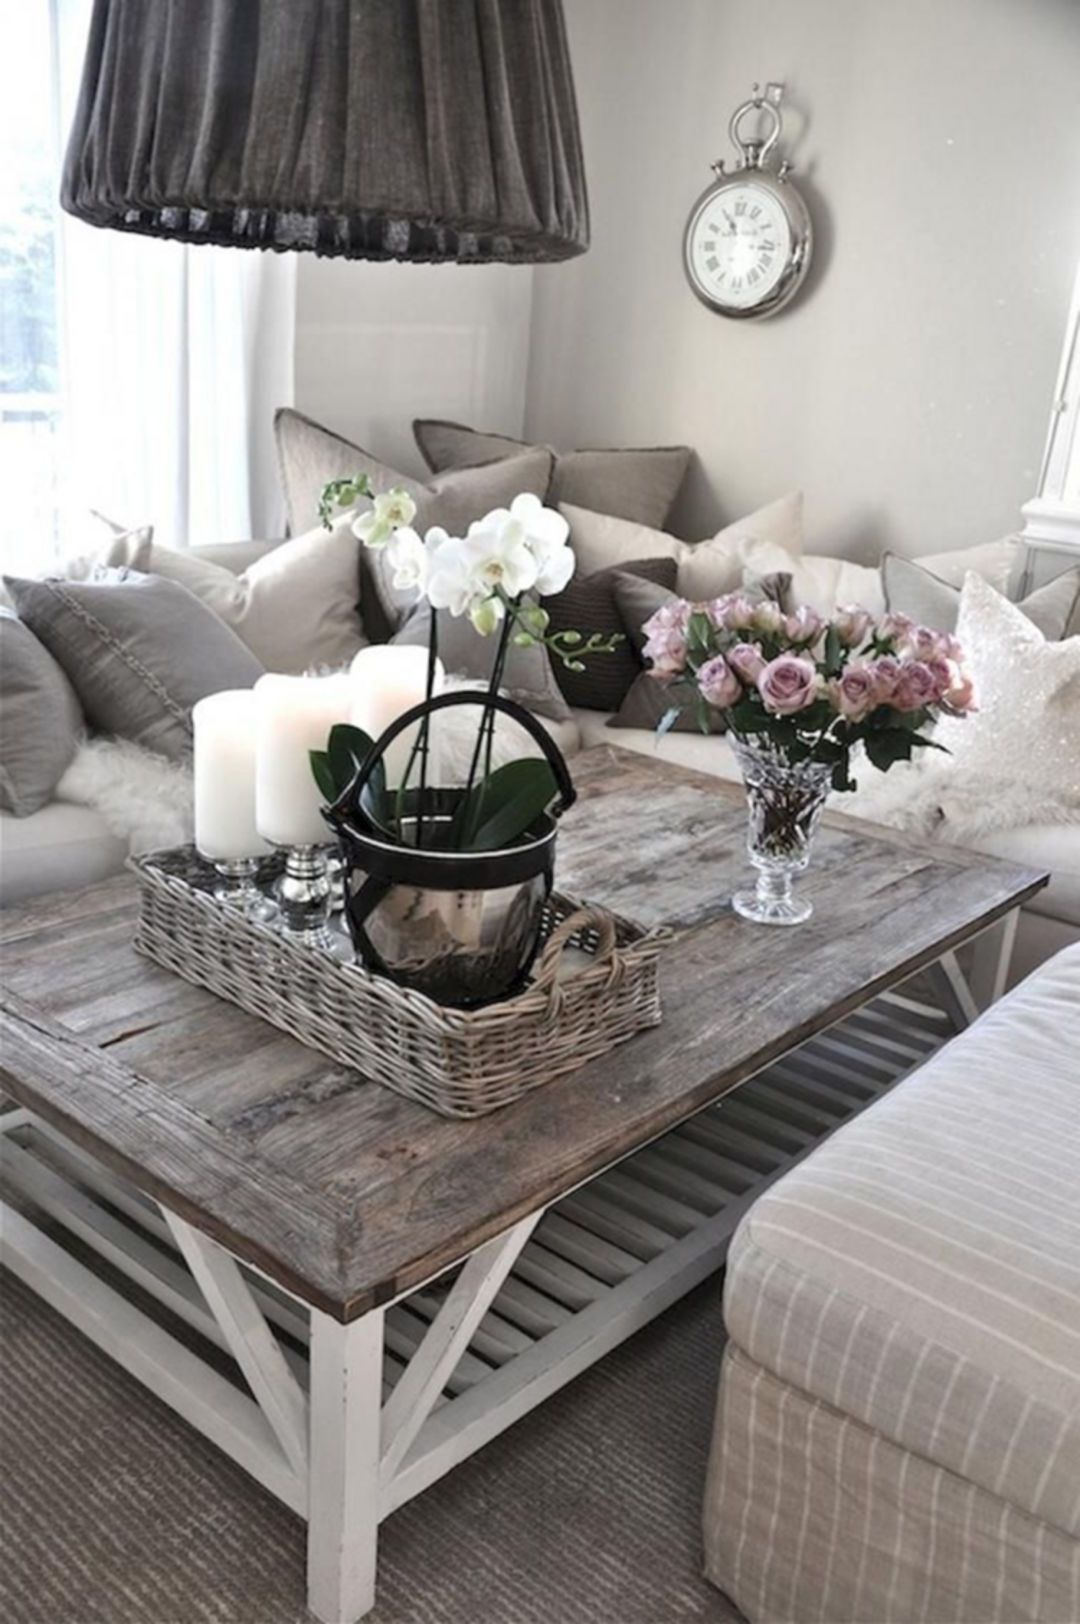 Adorable 25+ Great Farmhouse Coffee Table Design And Decor Ideas Https Within Living Room Farmhouse Coffee Tables (View 3 of 20)